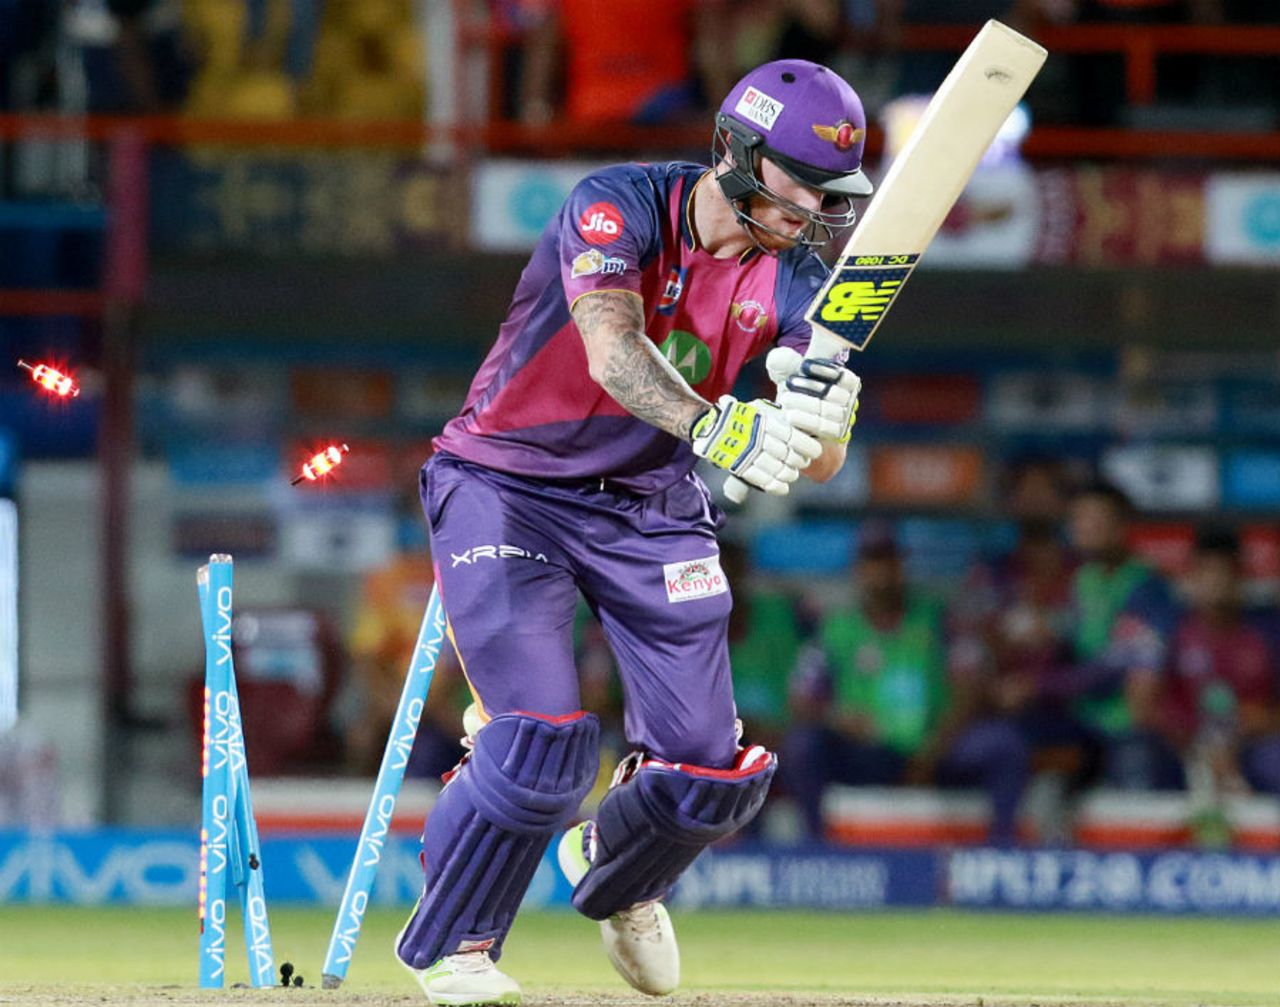 Ben Stokes is deceived by a knuckle ball, Gujarat Lions v Rising Pune Supergiant, IPL, Rajkot, April 14, 2017